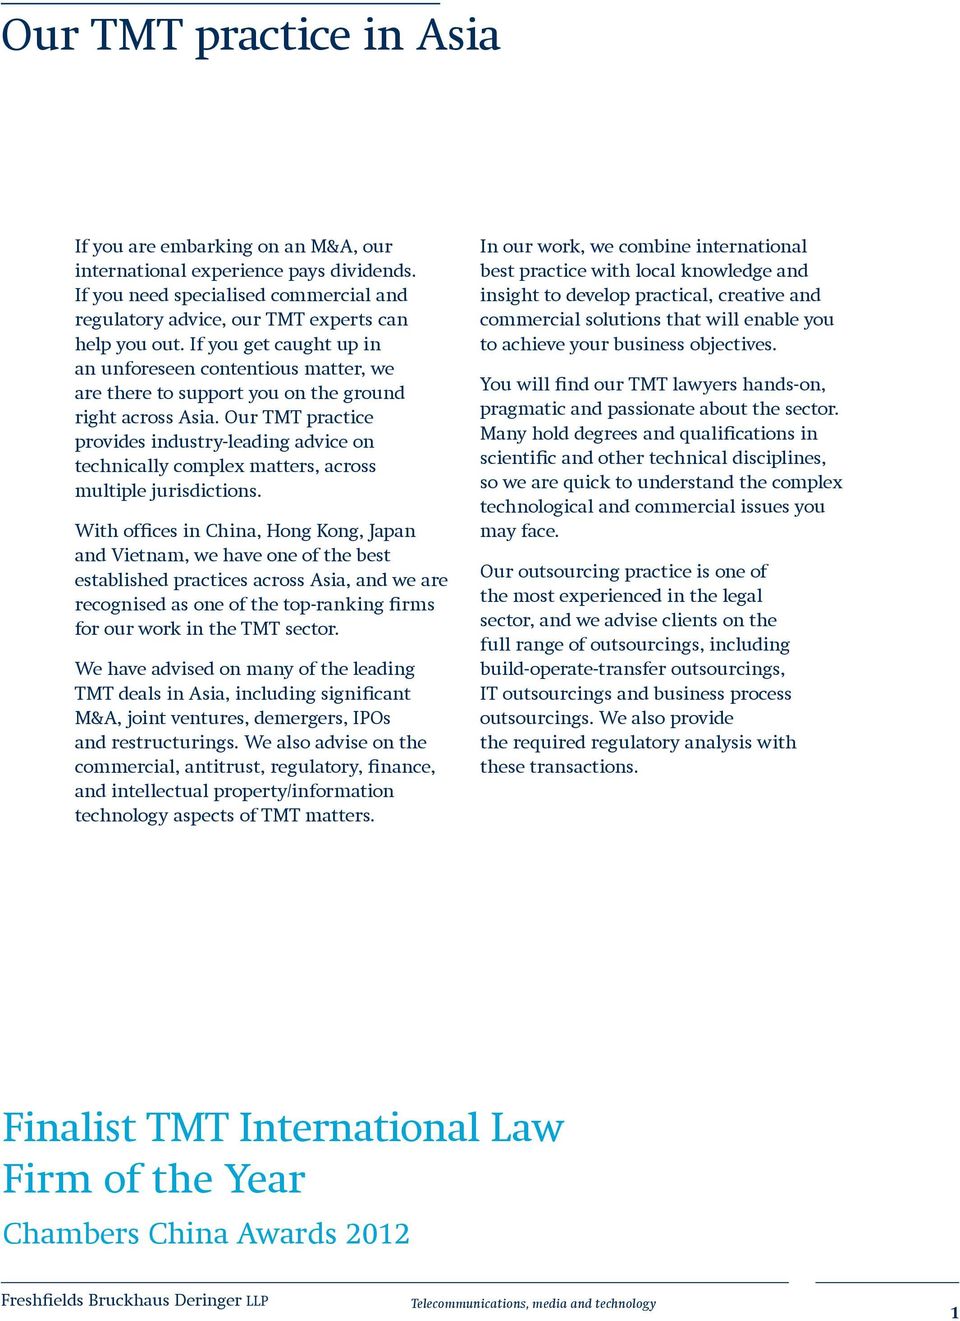 Our TMT practice provides industry leading advice on technically complex matters, across multiple jurisdictions.